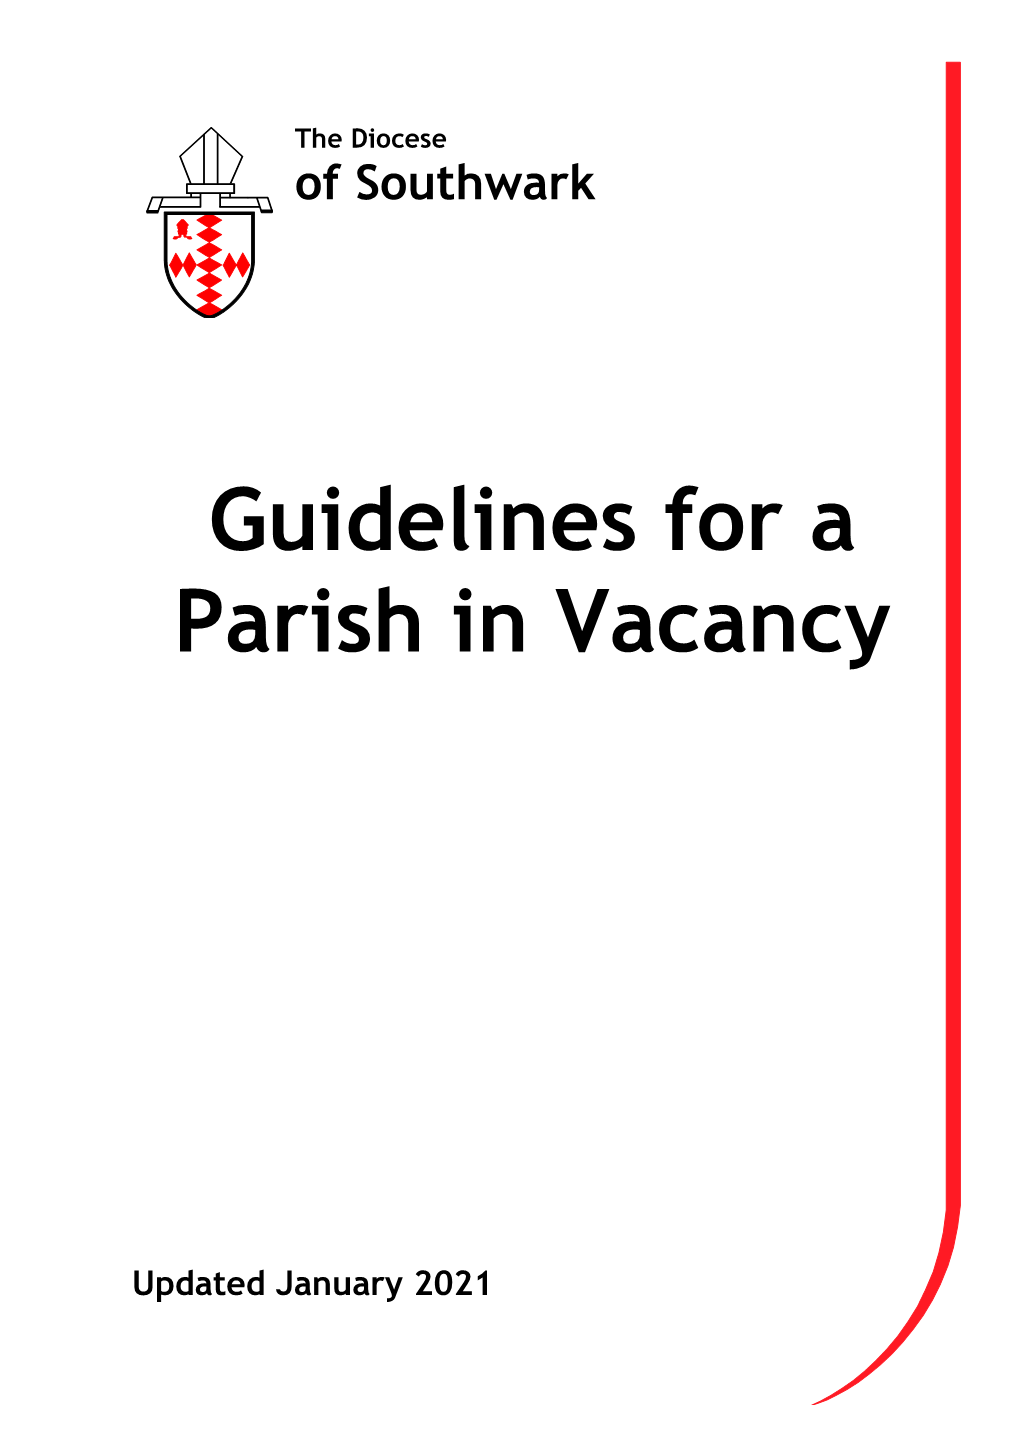 Guidelines for a Parish in Vacancy